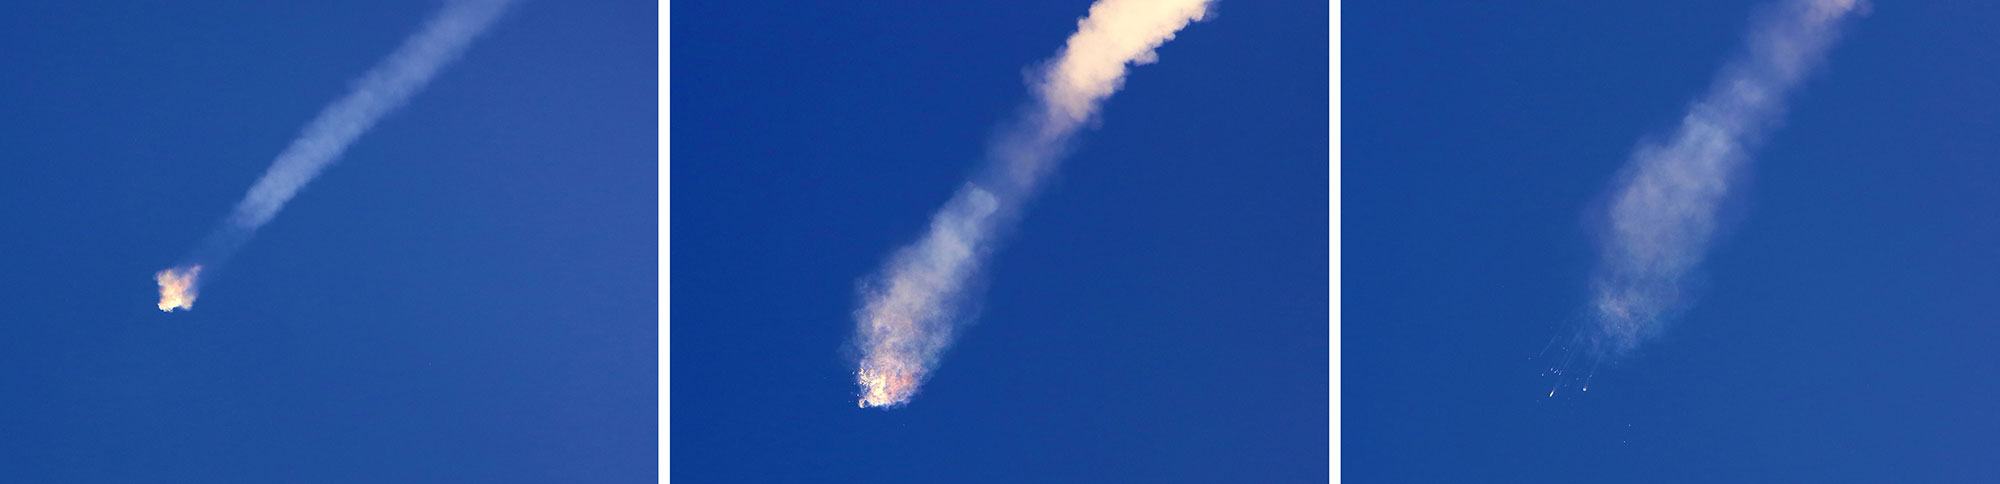 The SpaceX Falcon 9 rocket carrying the Dragon capsule on the CRS-7 resupply mission to the International Space Station suffered a failure of the second stage and disintegrated seconds after passing through maximum aerodynamic pressure. The rocket and cargo are presumed to be a total loss. Credit: Alan Waters / AmericaSpace